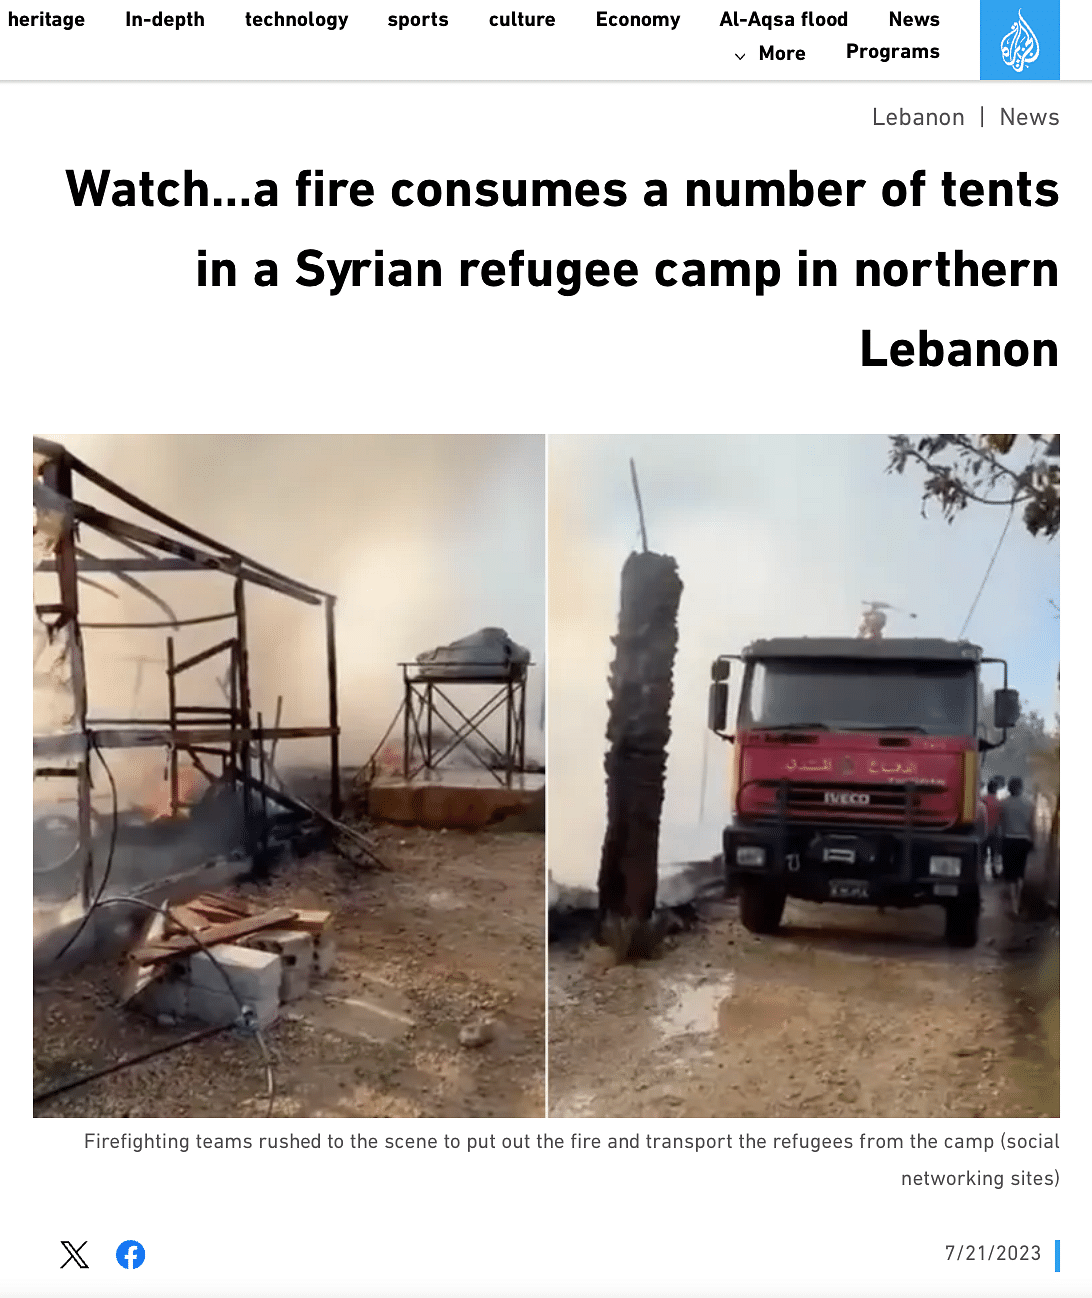 This is an old video of Hanin Al-Minya Camp, a Syrian refugee camp in Lebanon and does not show visuals from Gaza.